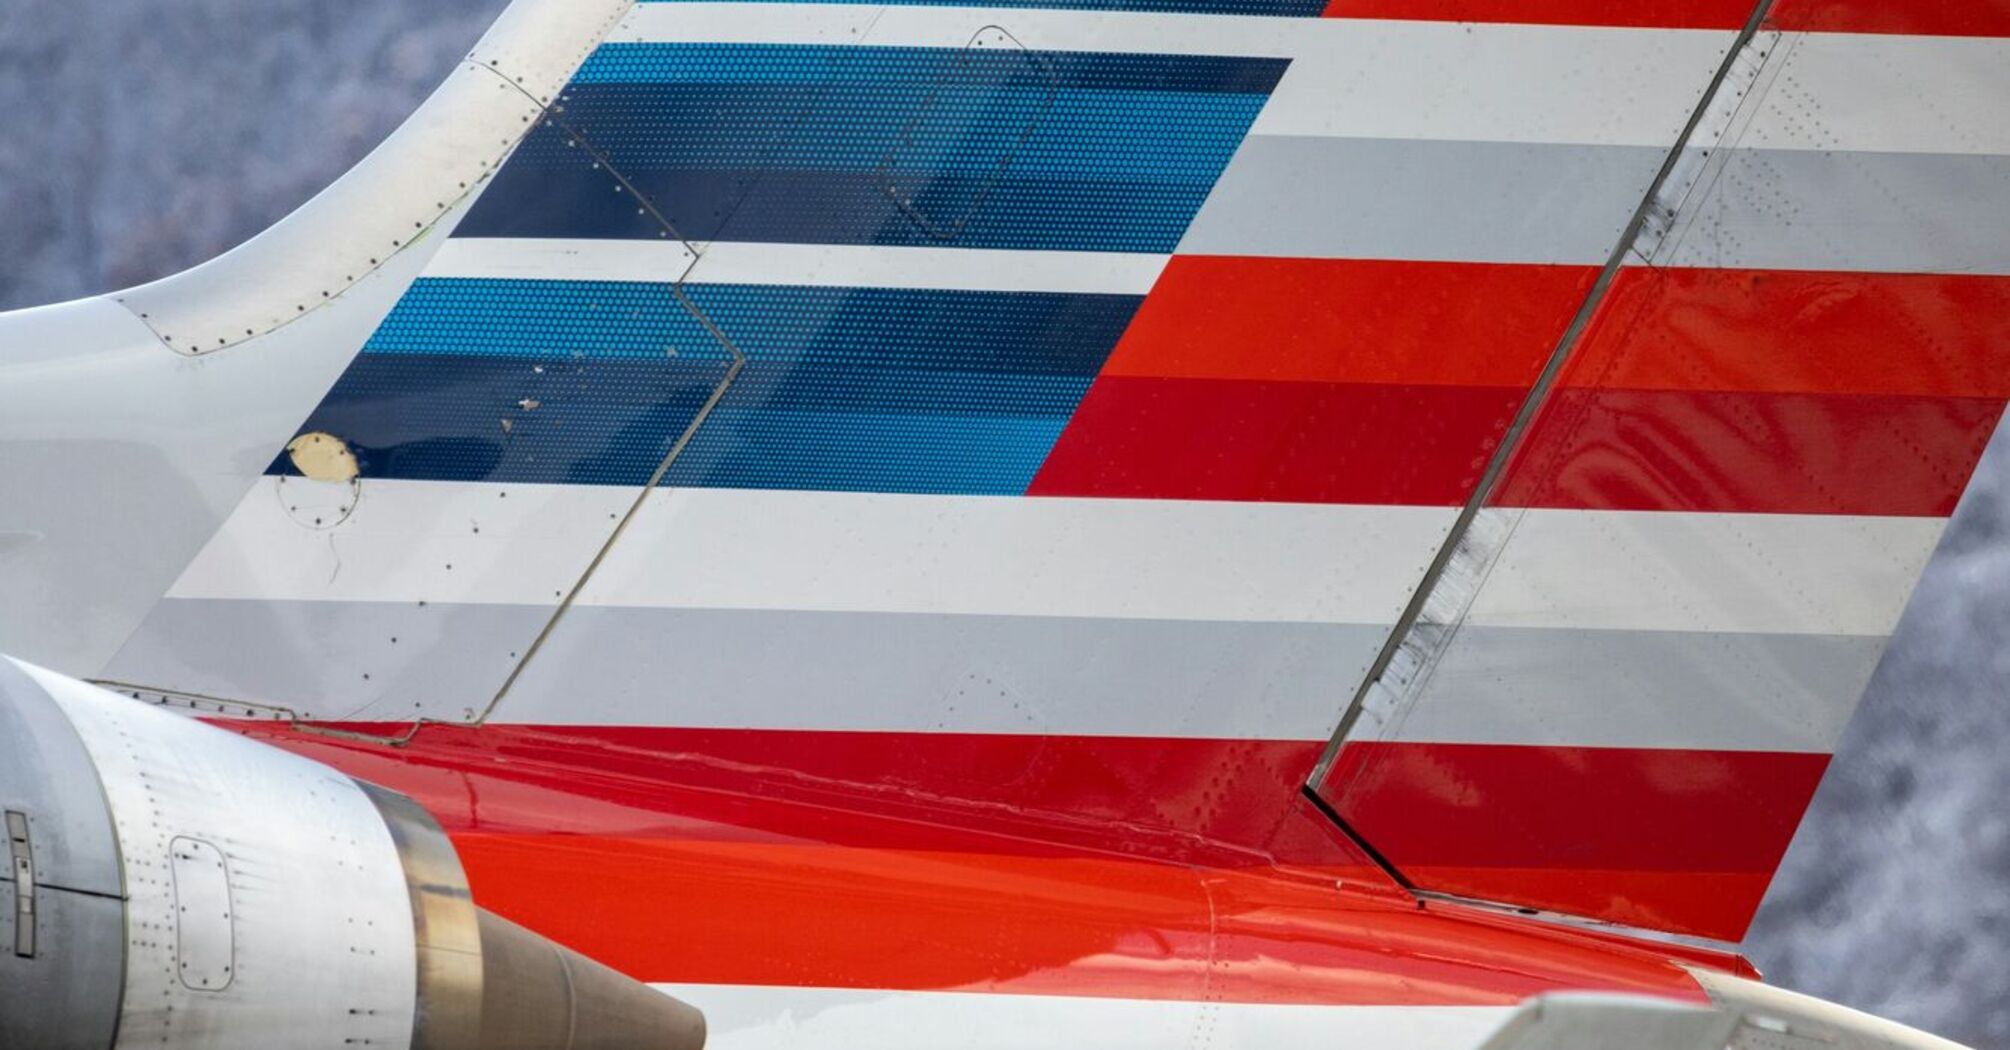 The tail section of an American Airlines airplane with red, white, and blue stripes